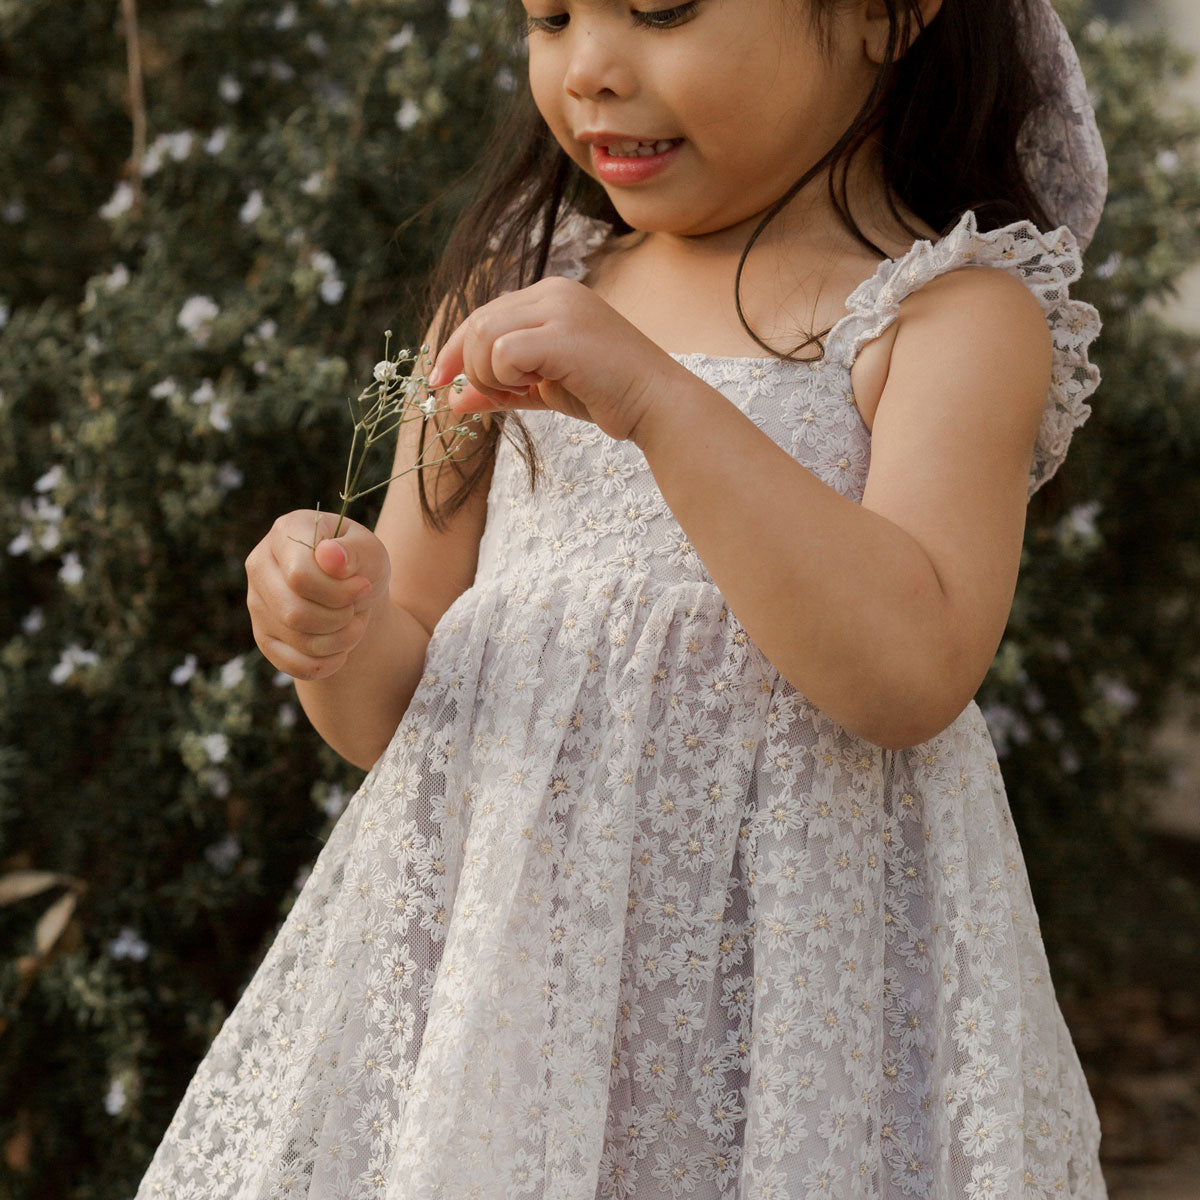 Little girl plays with flower while wearing Noralee Mara Dress - Cloud Daisy Tulle